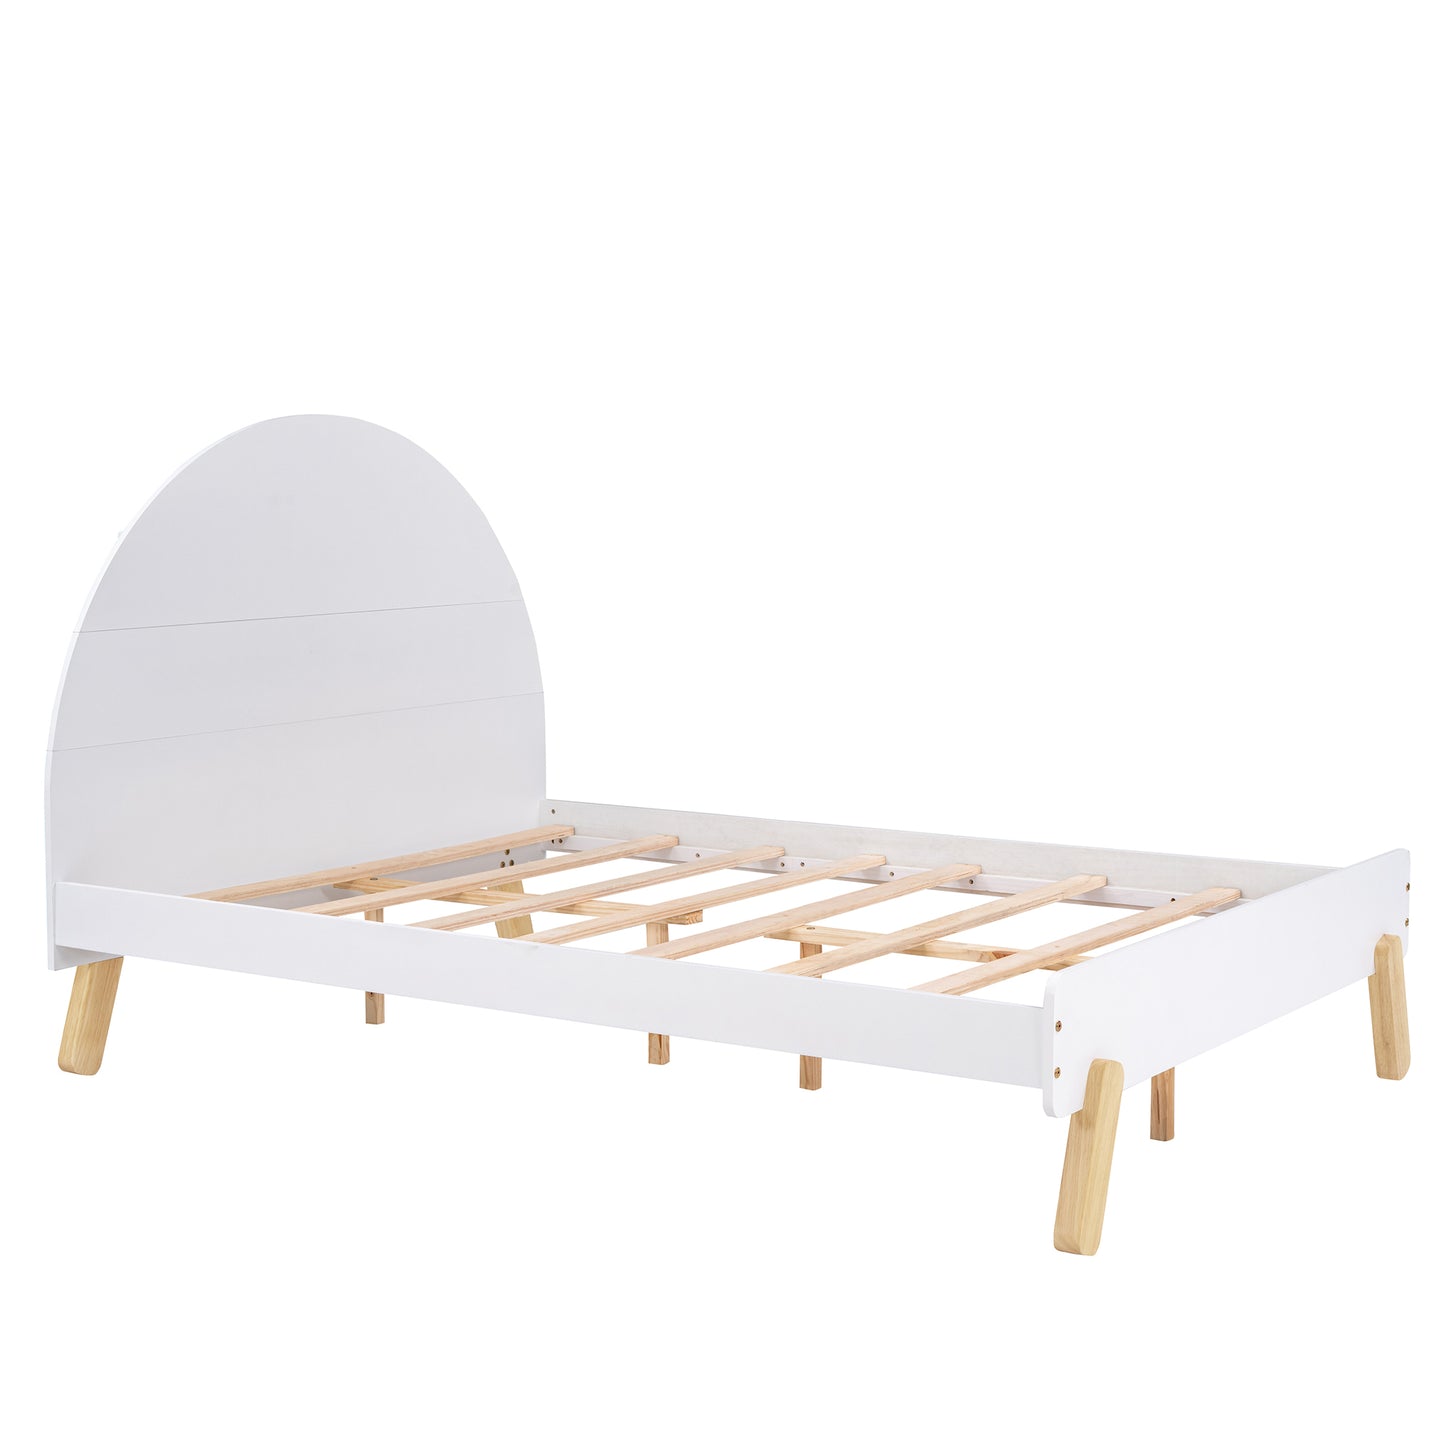 Wooden Cute Platform Bed With Curved Headboard ,Full Size Bed With Shelf Behind Headboard,White